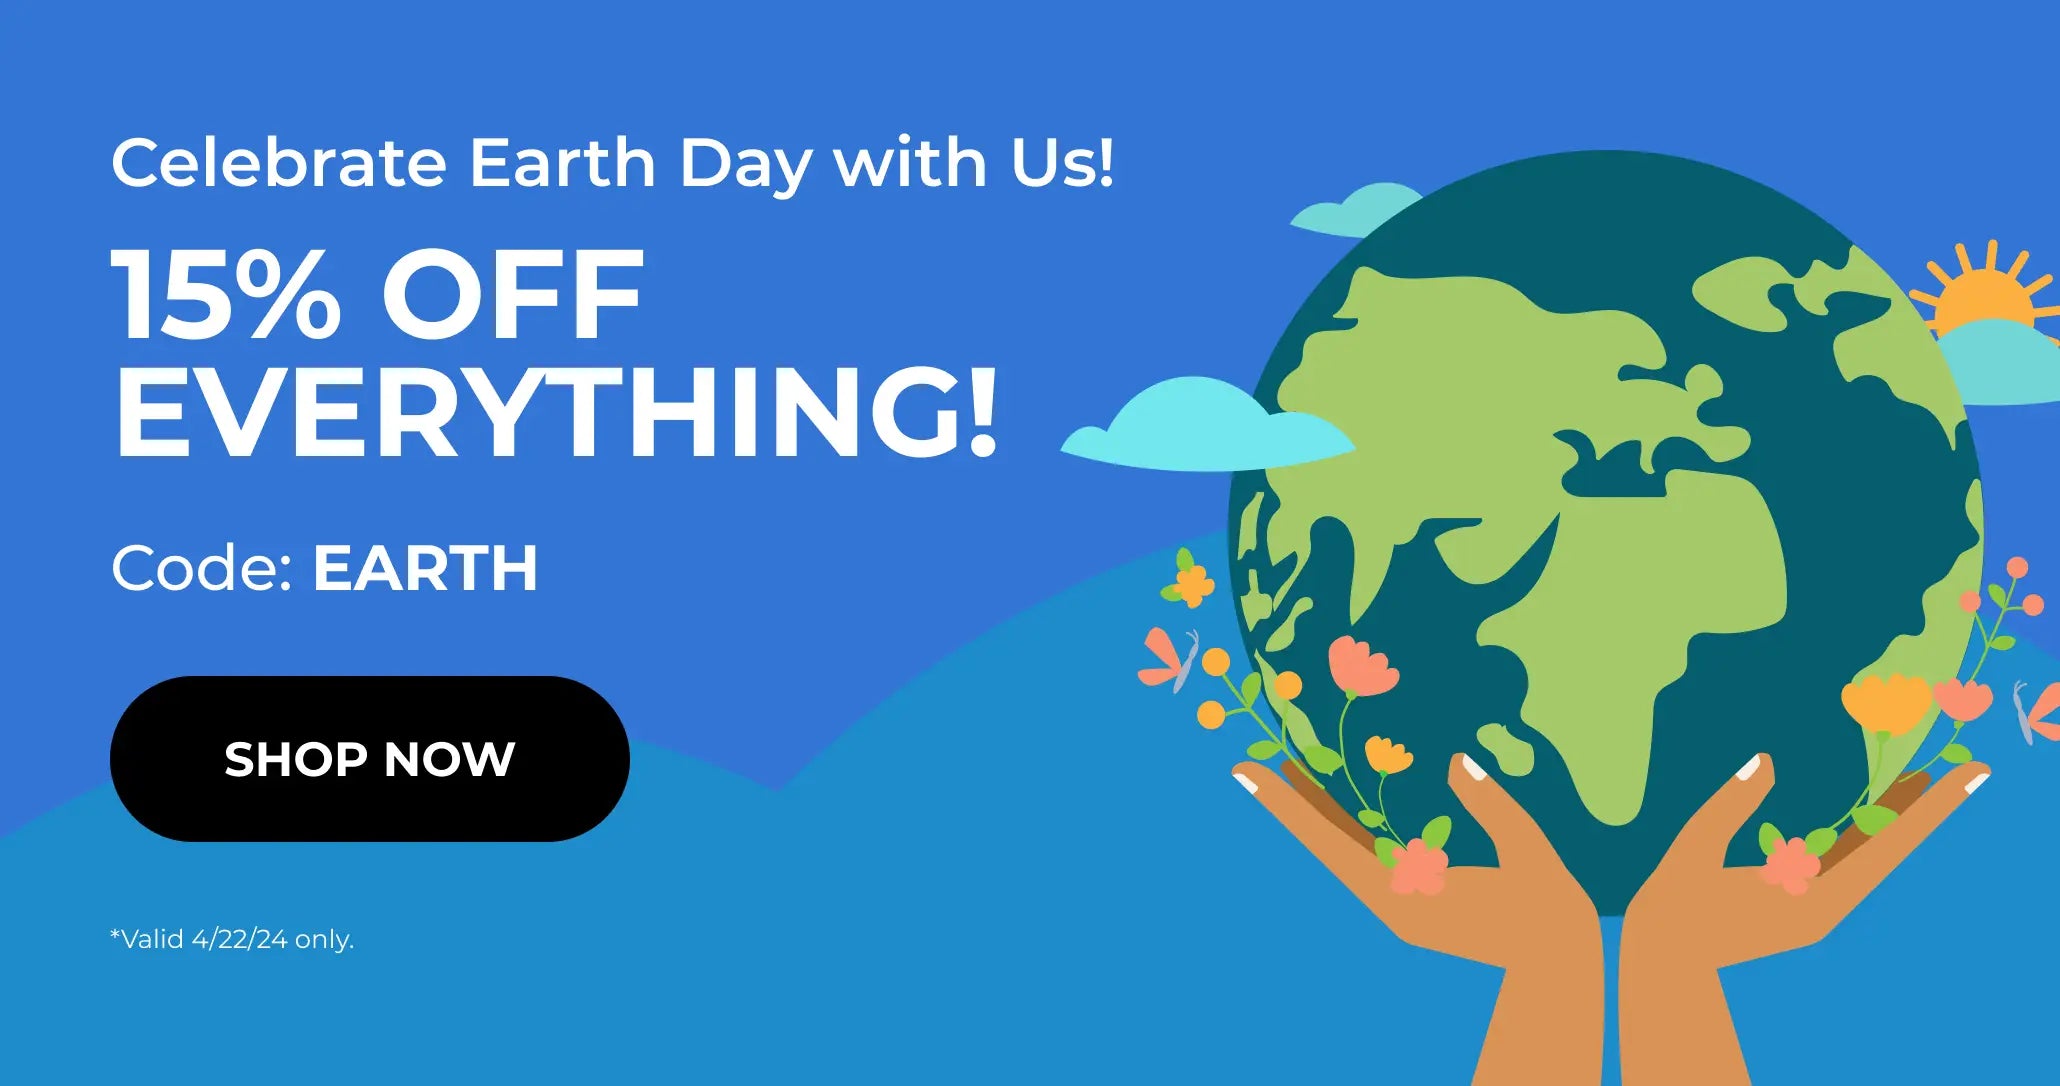 Today Only! 15% OFF Site-Wide with Code EARTH